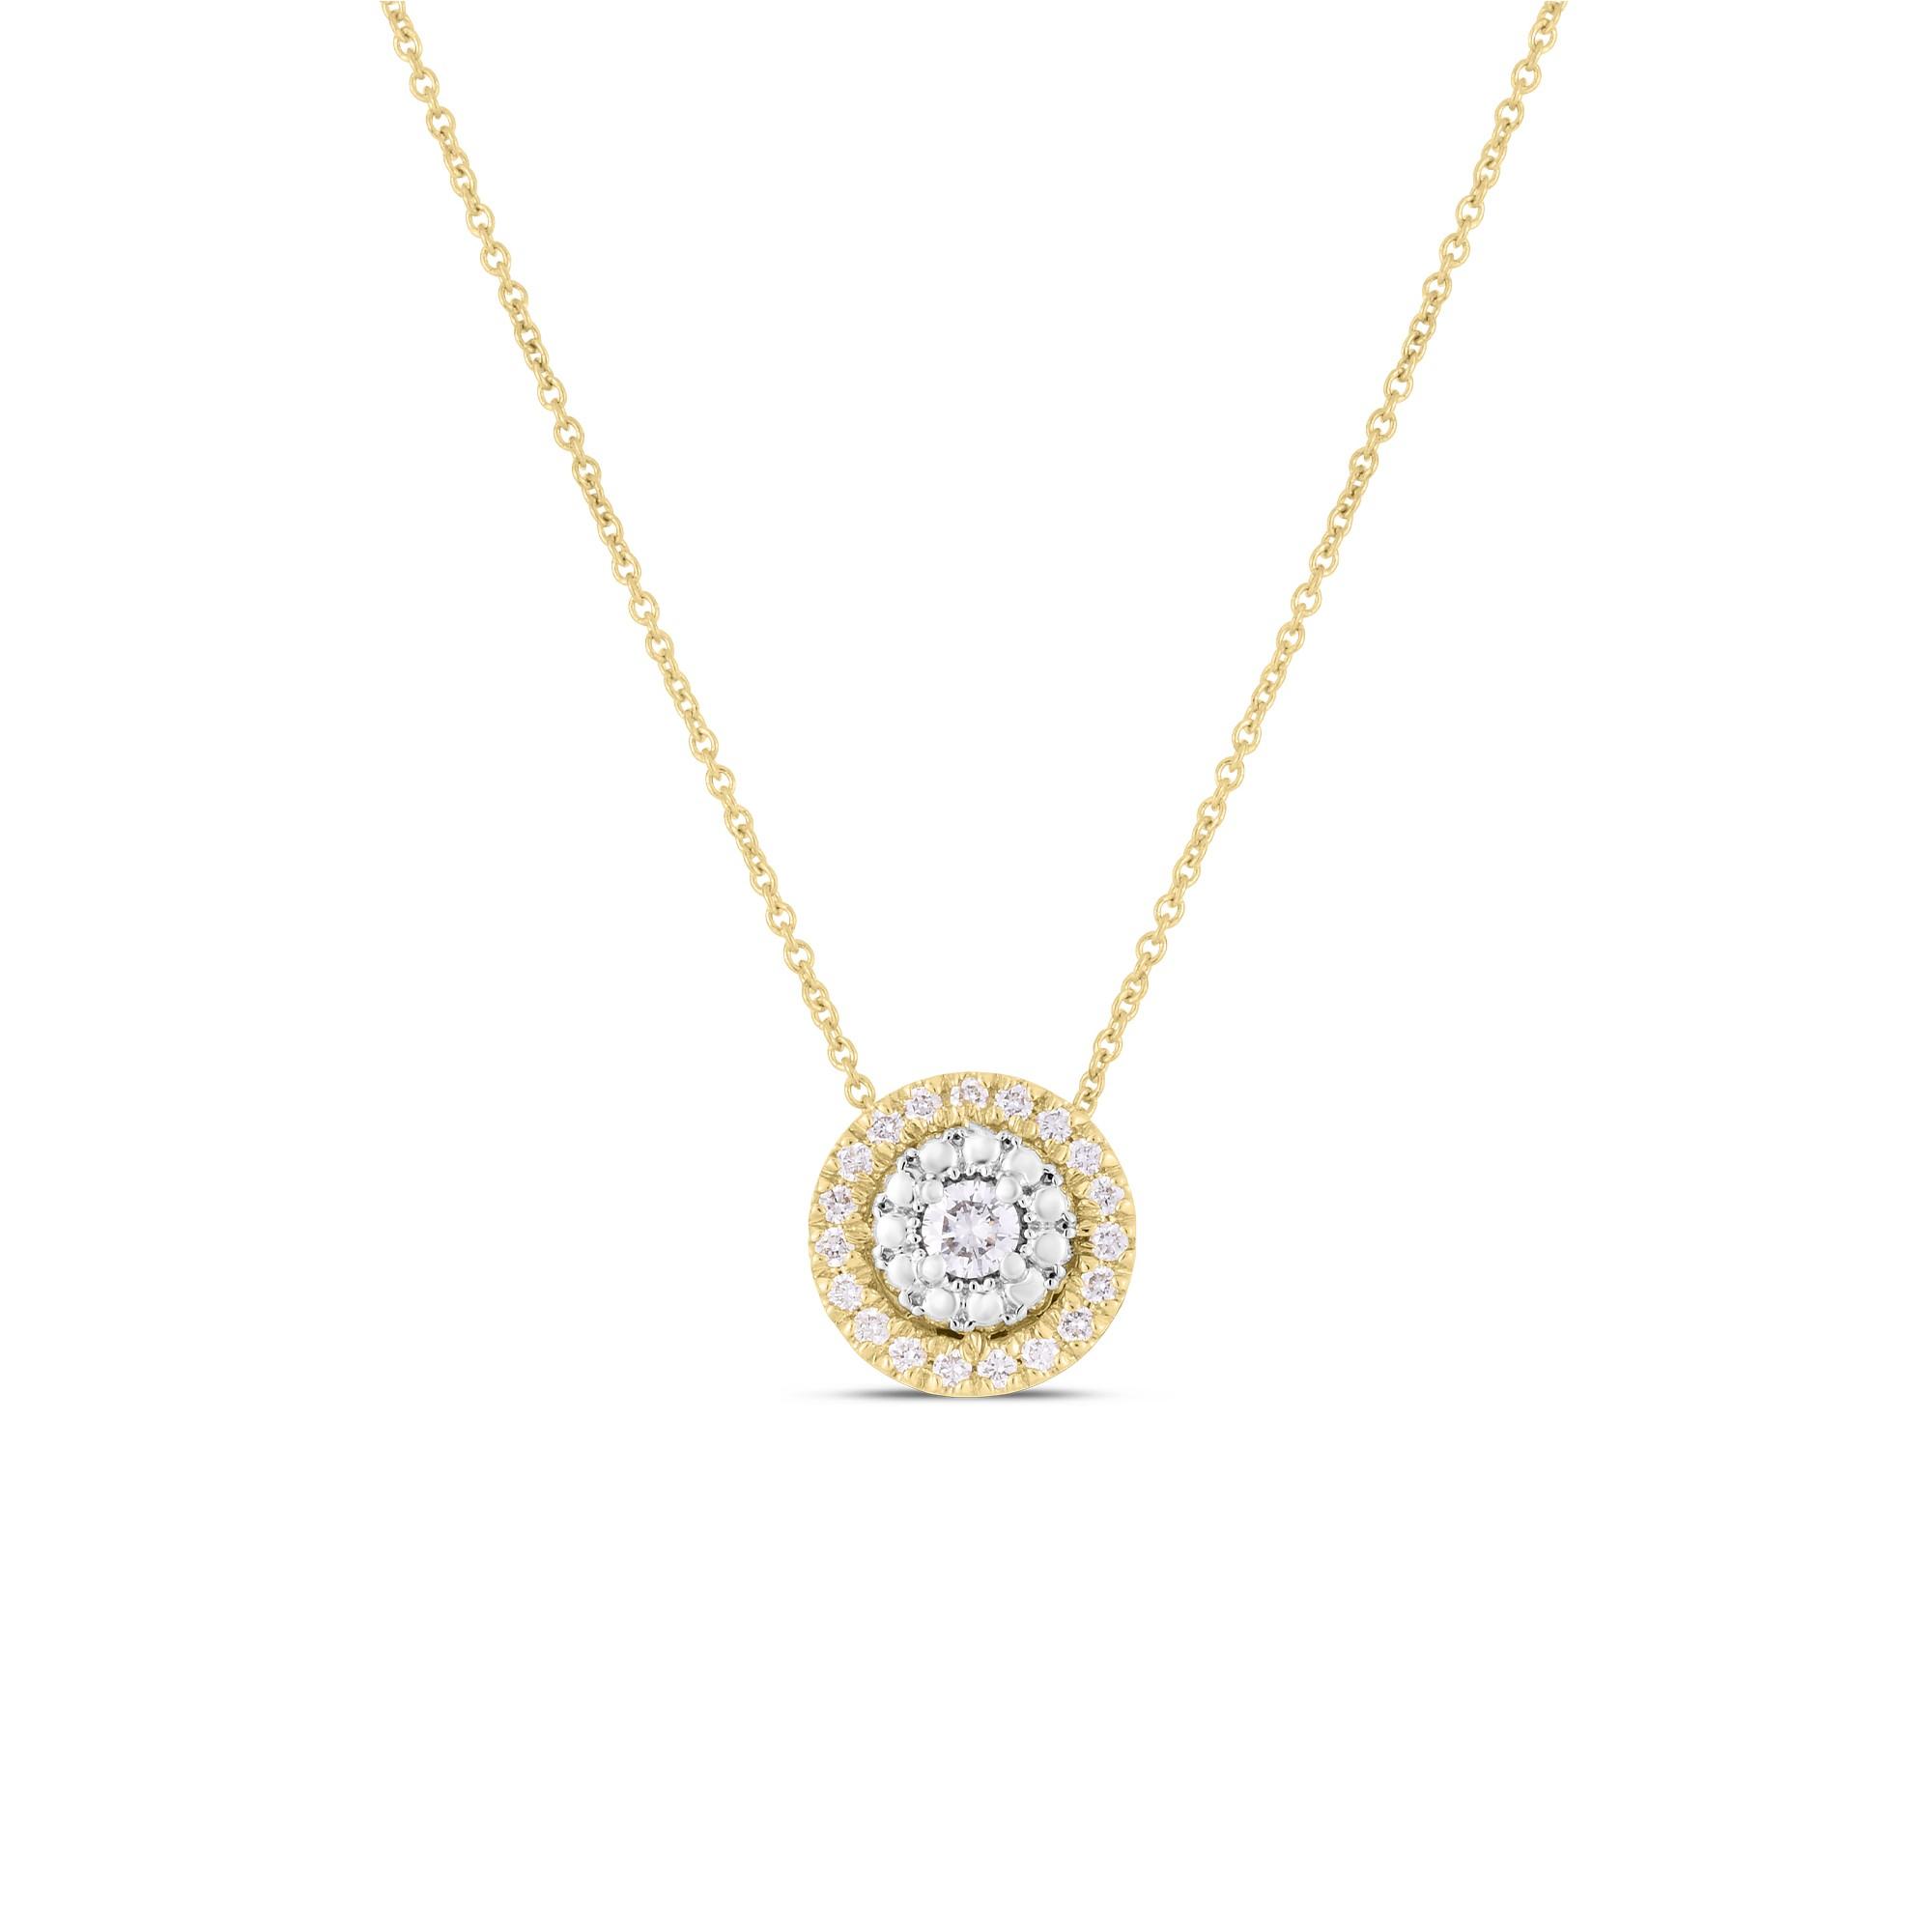 Roberto Coin Siena Collection Small Pave Dot Pendant Necklace